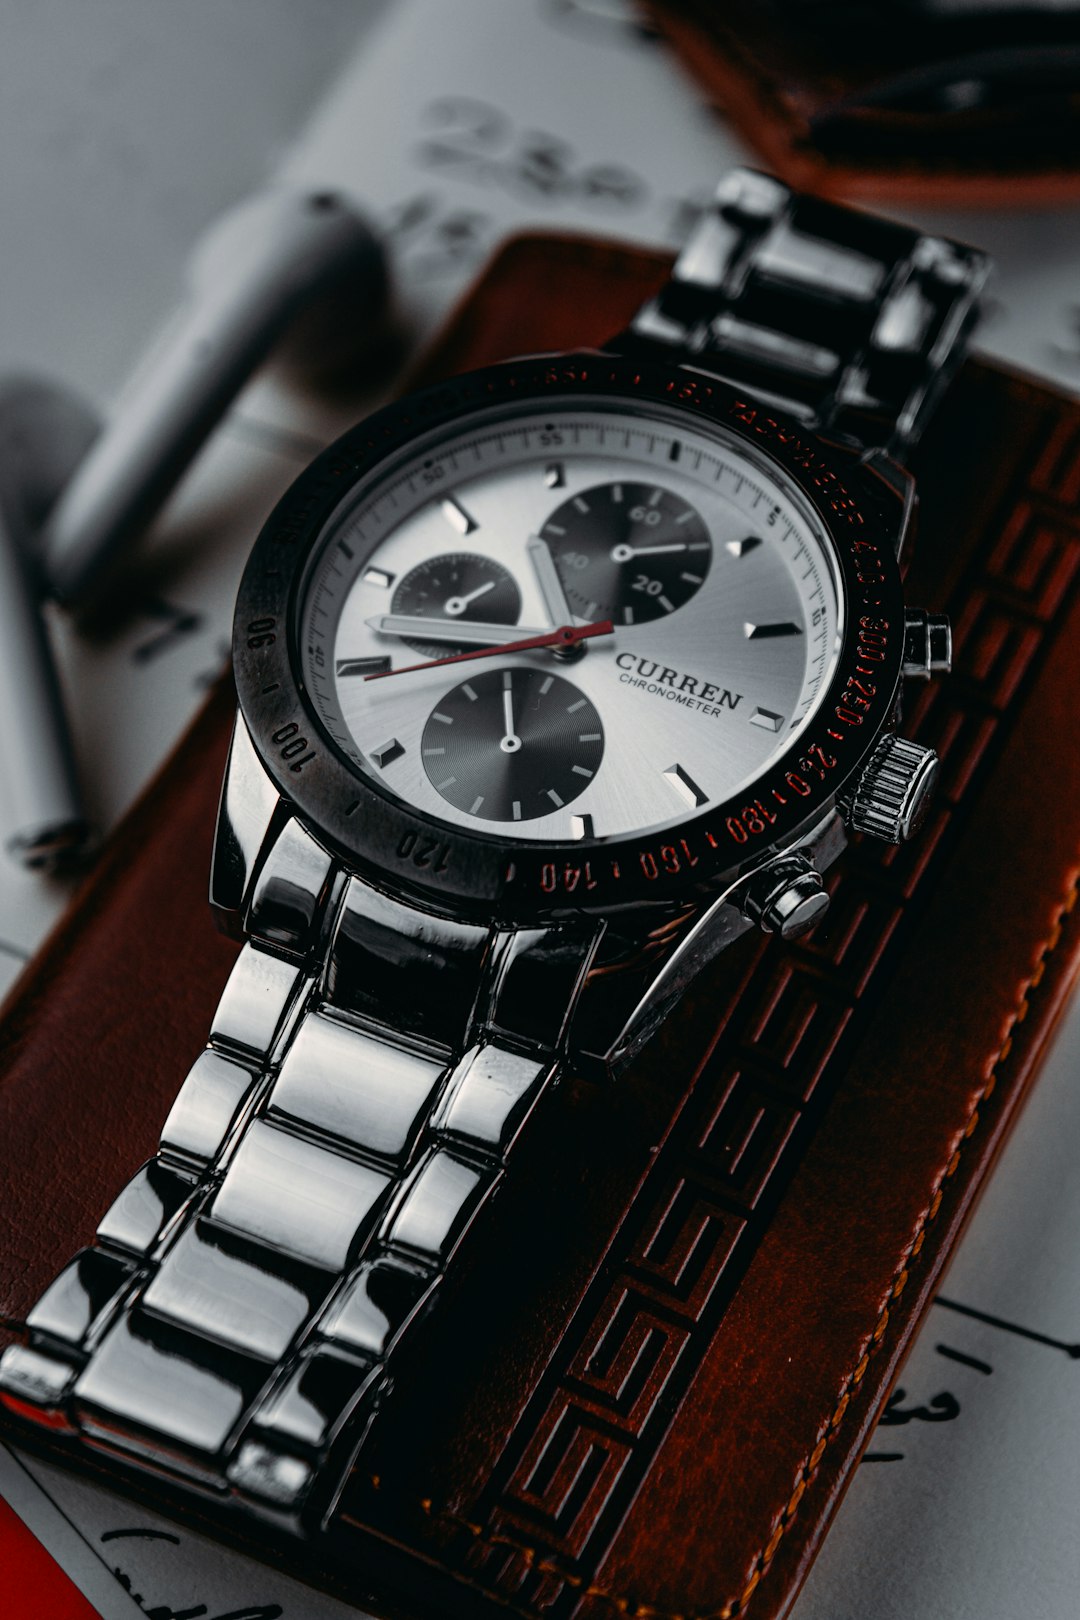 silver and black round chronograph watch